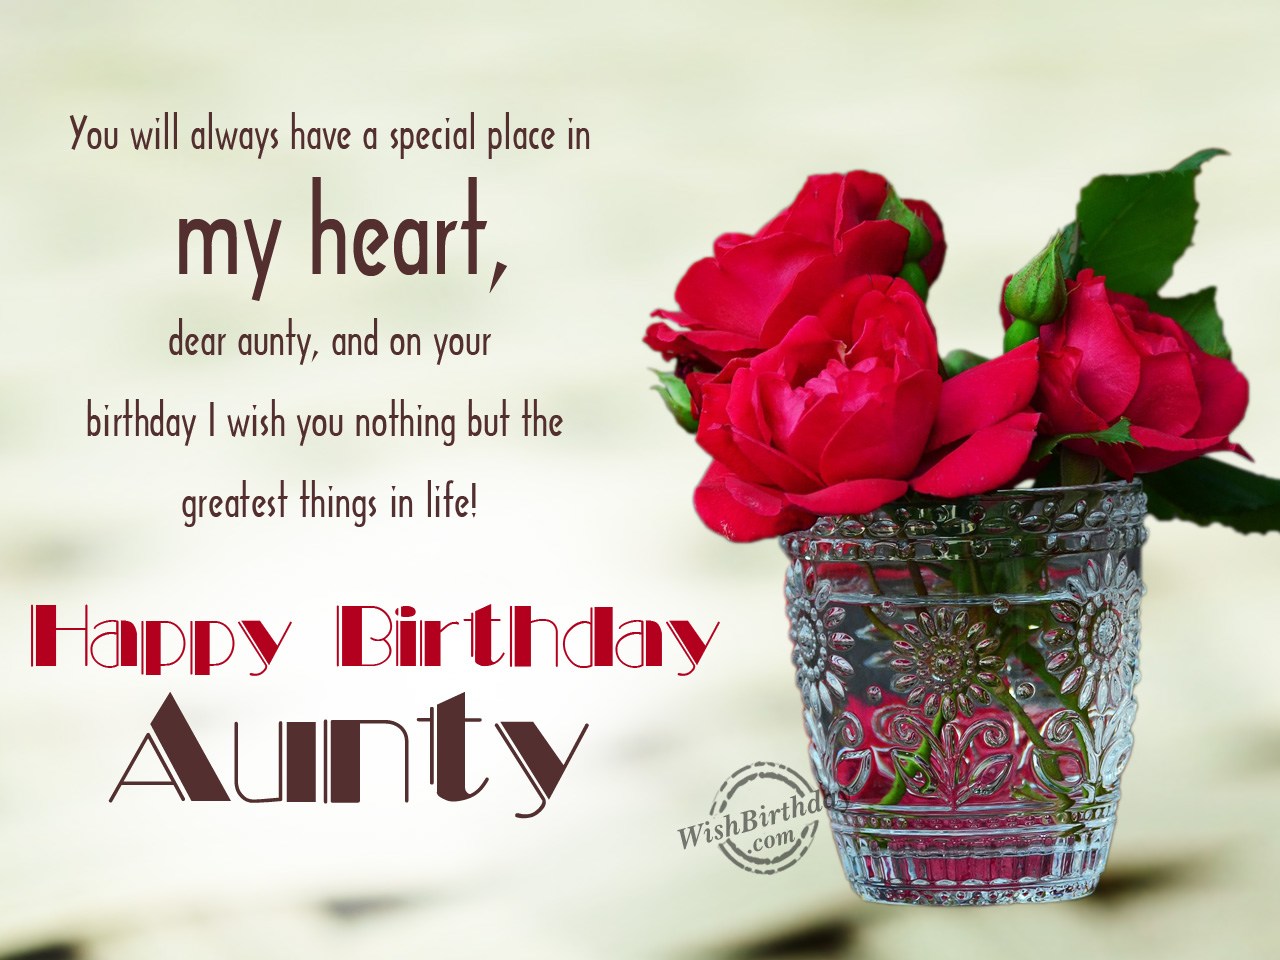 Birday Wishes For Aunt Birday Images Pictures